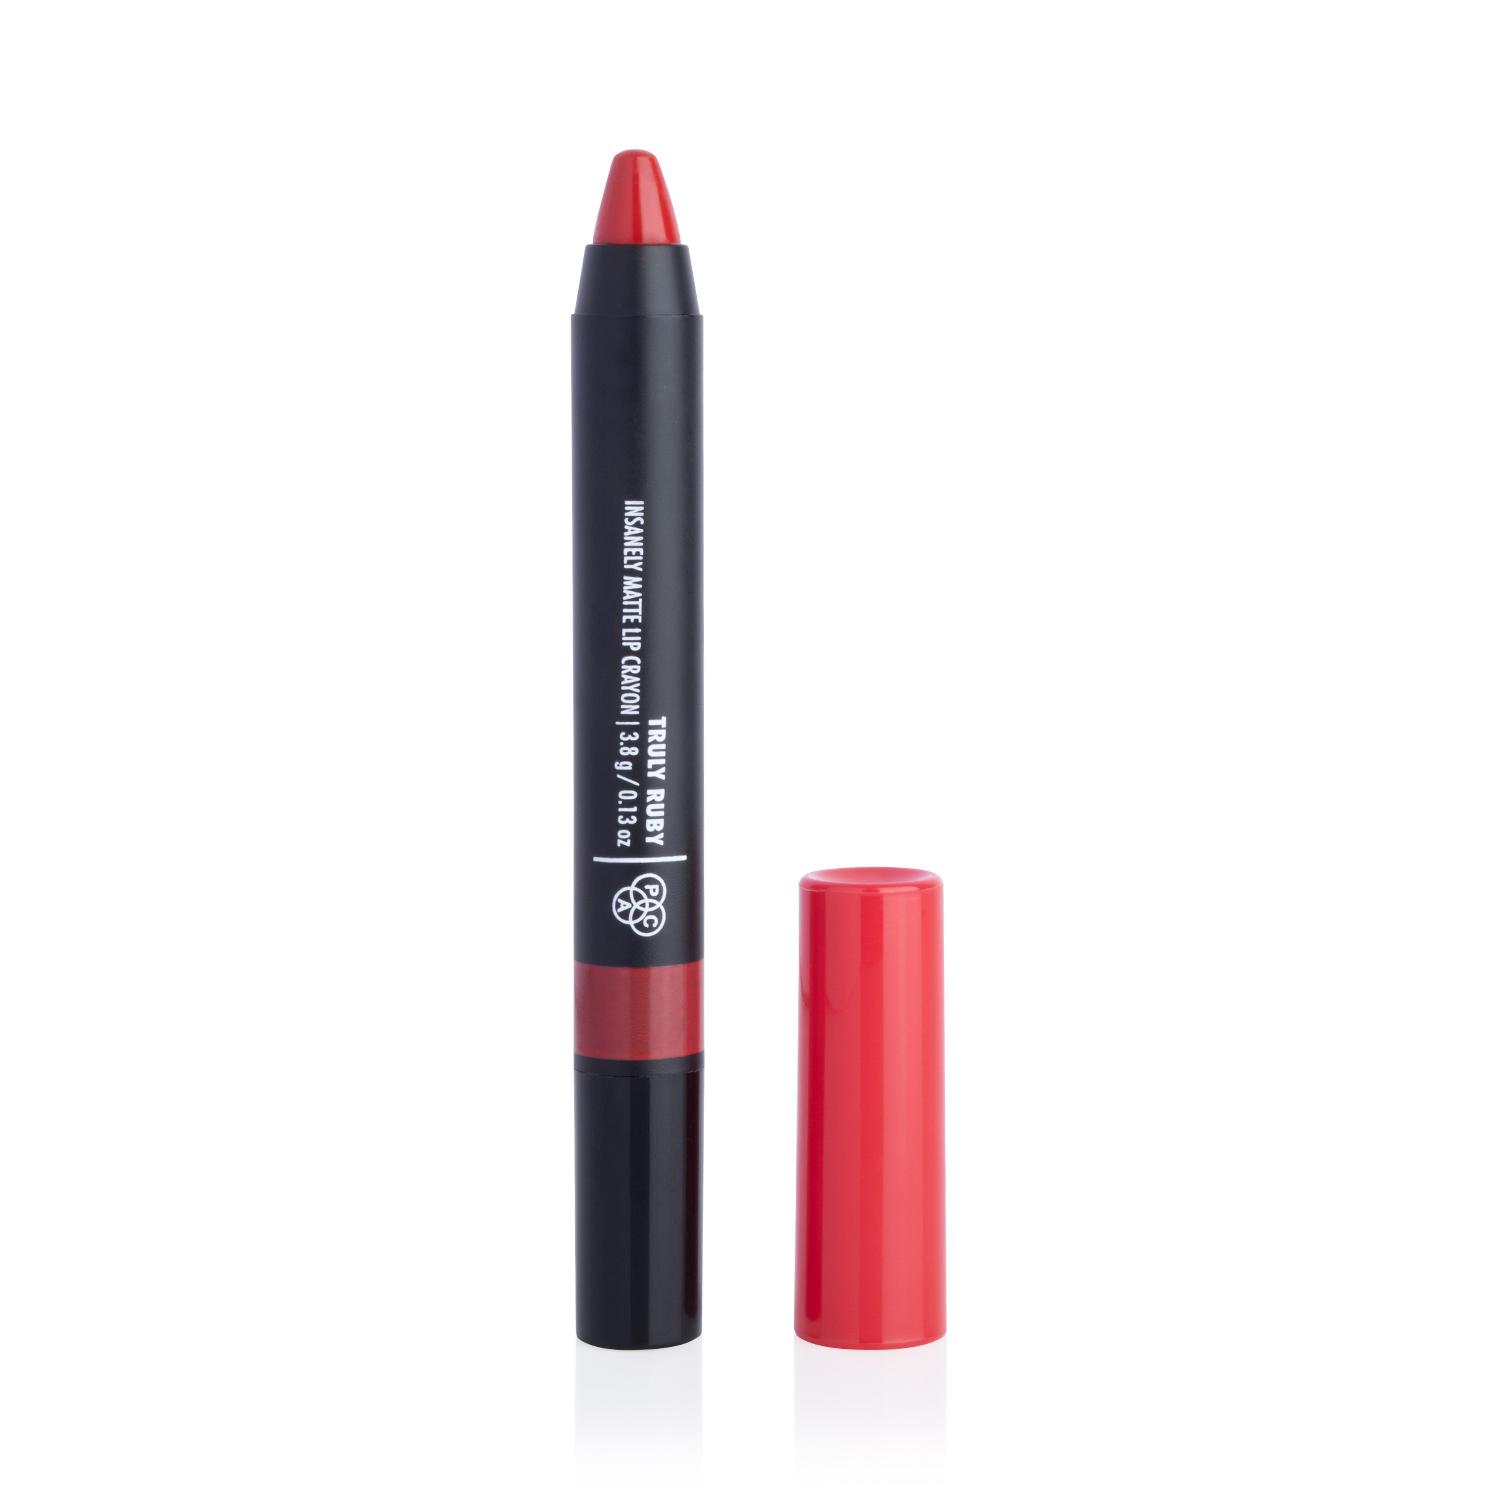 PAC | PAC Insanely Matte Lip Crayon - Truly Ruby (3.8g)